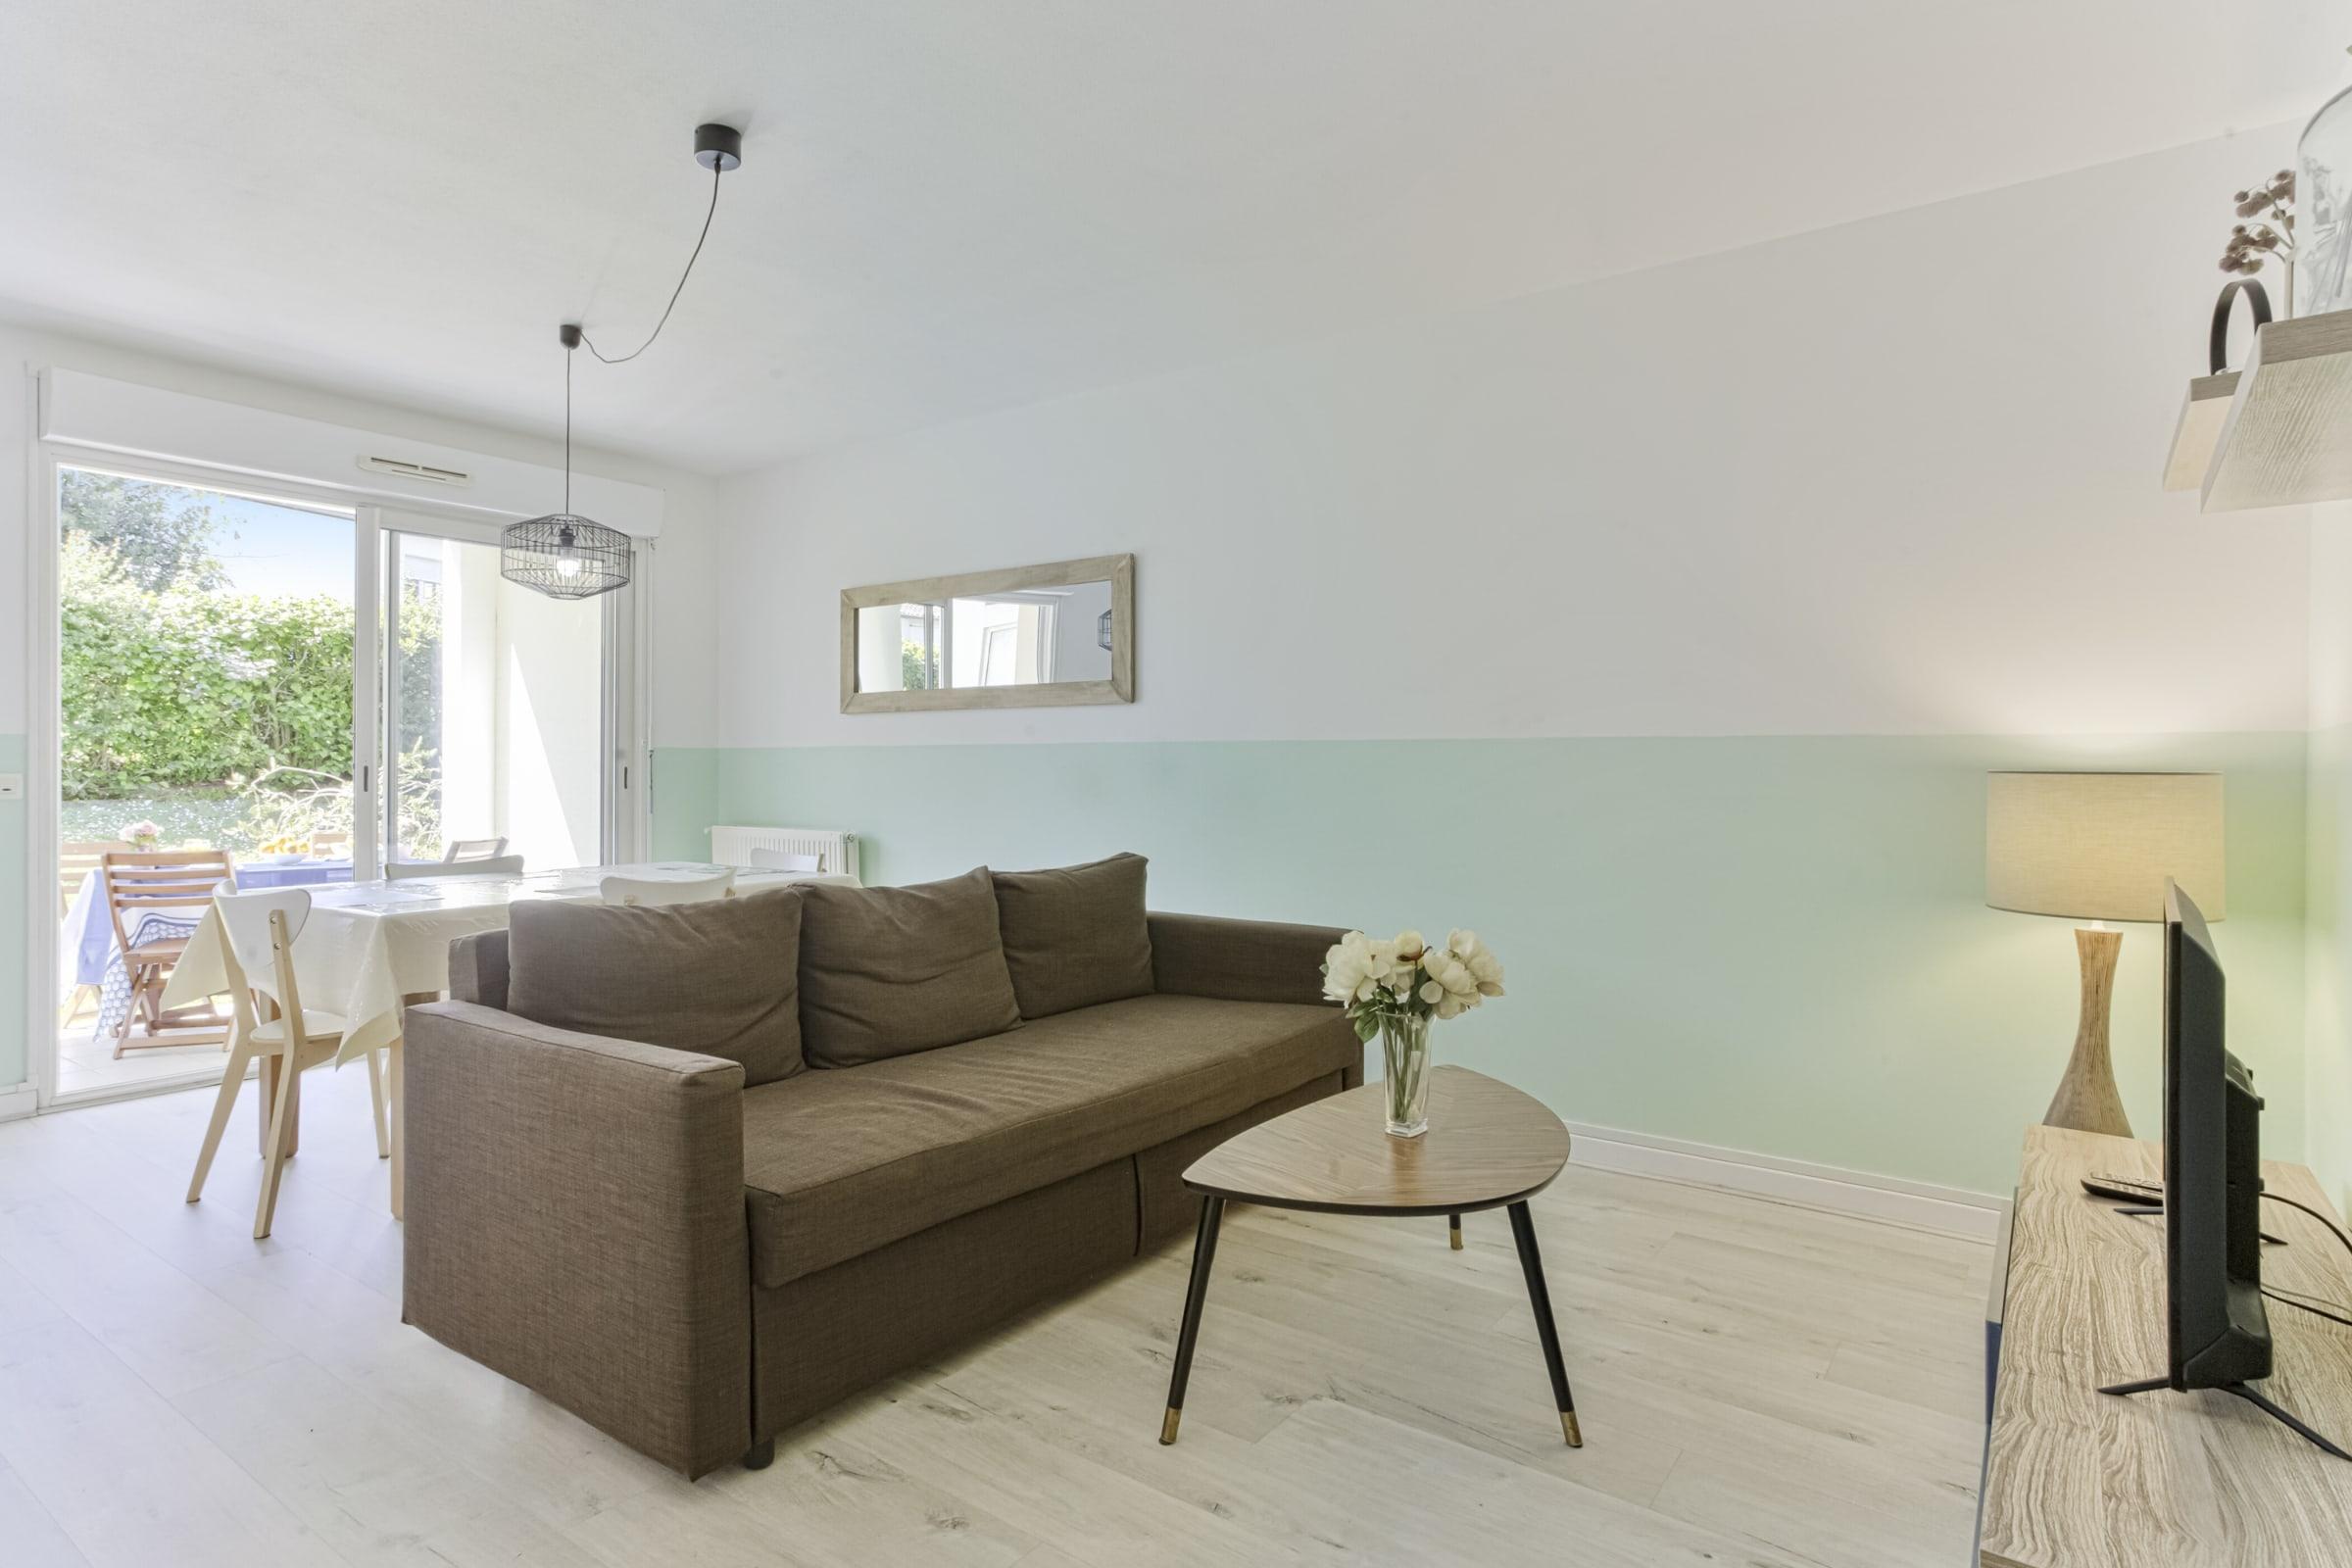 Property Image 2 - Charming flat with sunny terrace - Anglet